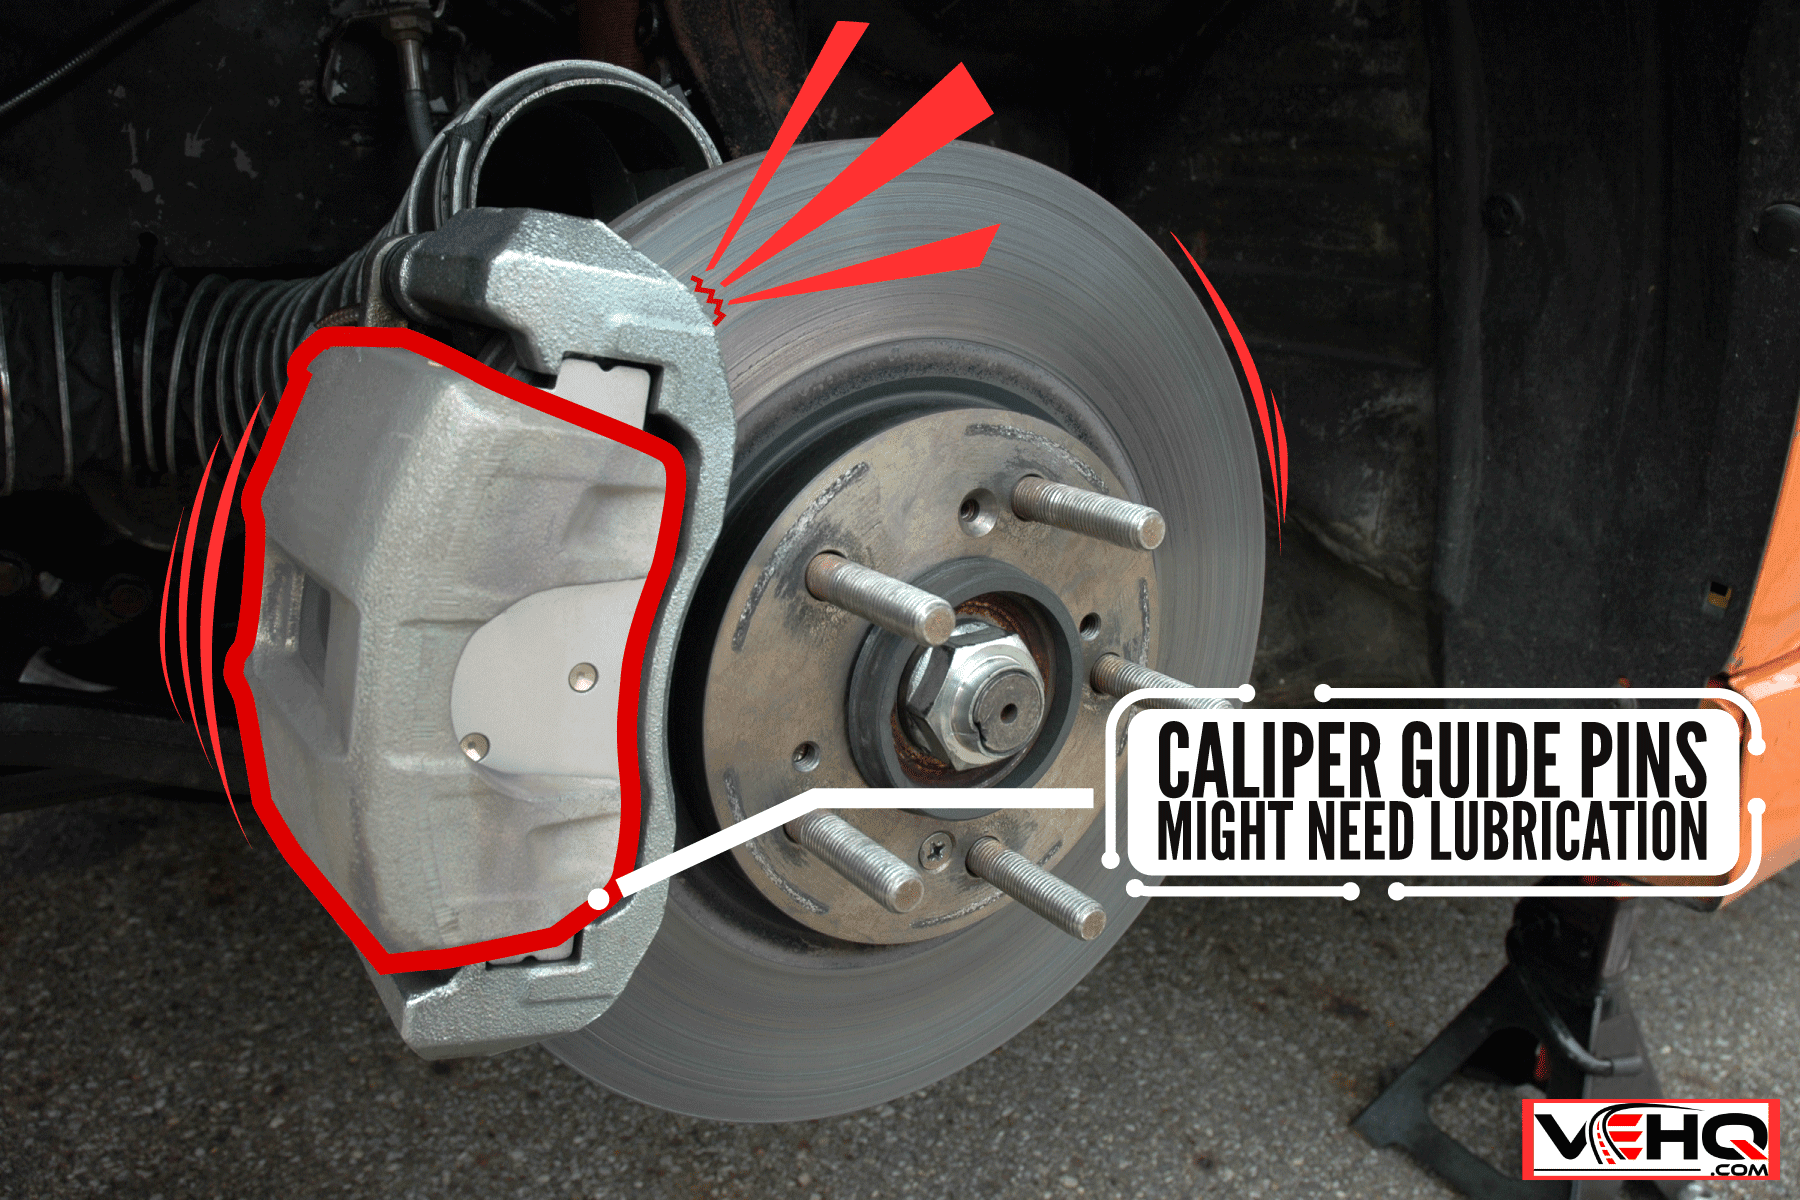 A car disk brake, Creaking Noise When Braking - What Could Be Wrong?